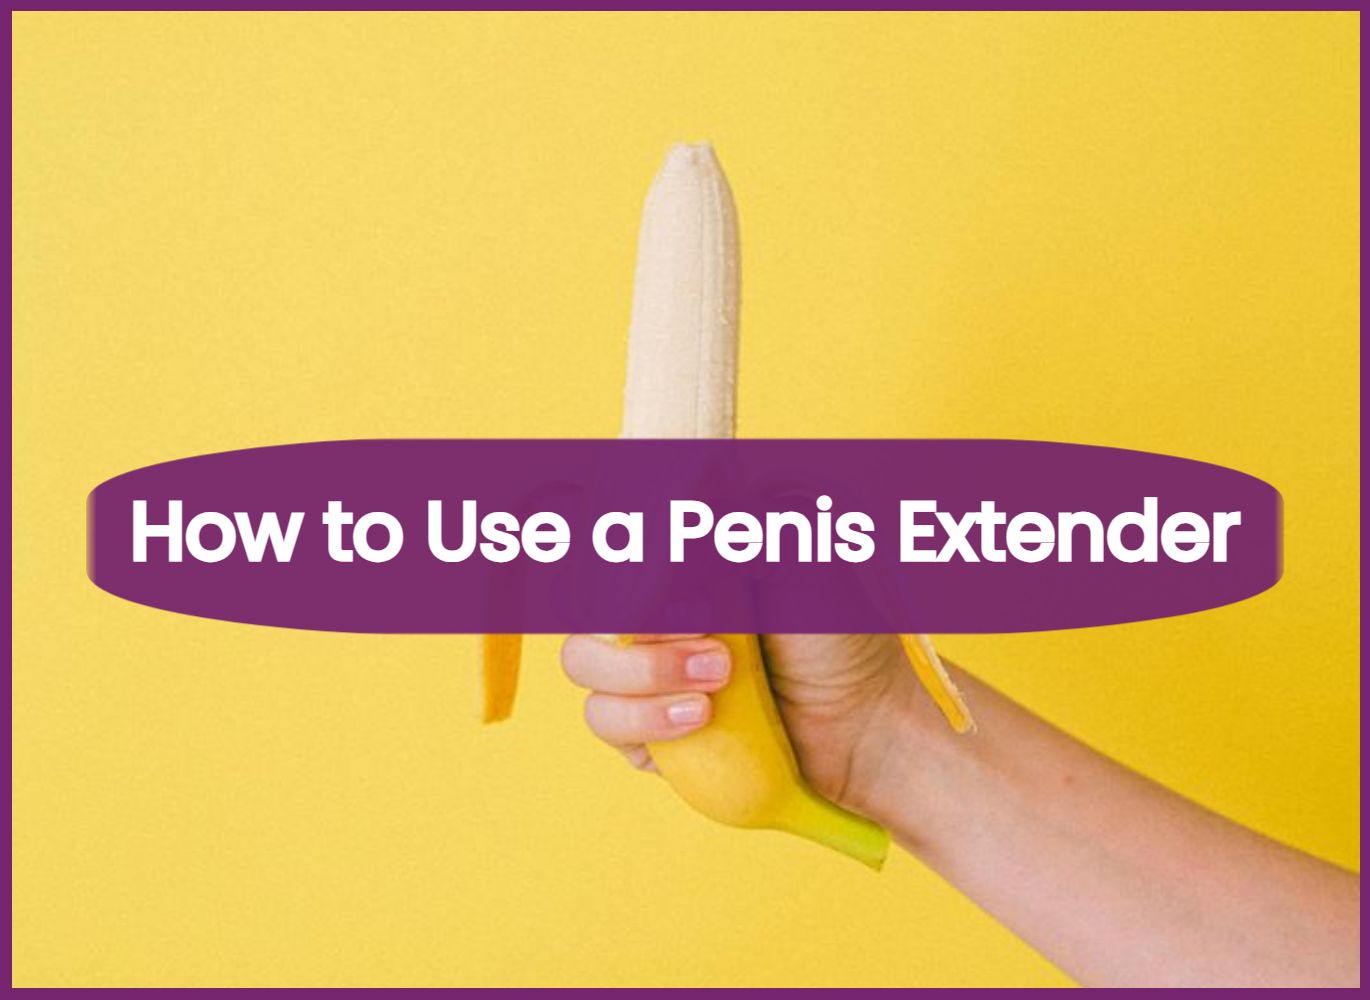 How to Use a Penis Extender (AKA Penis Sleeve)